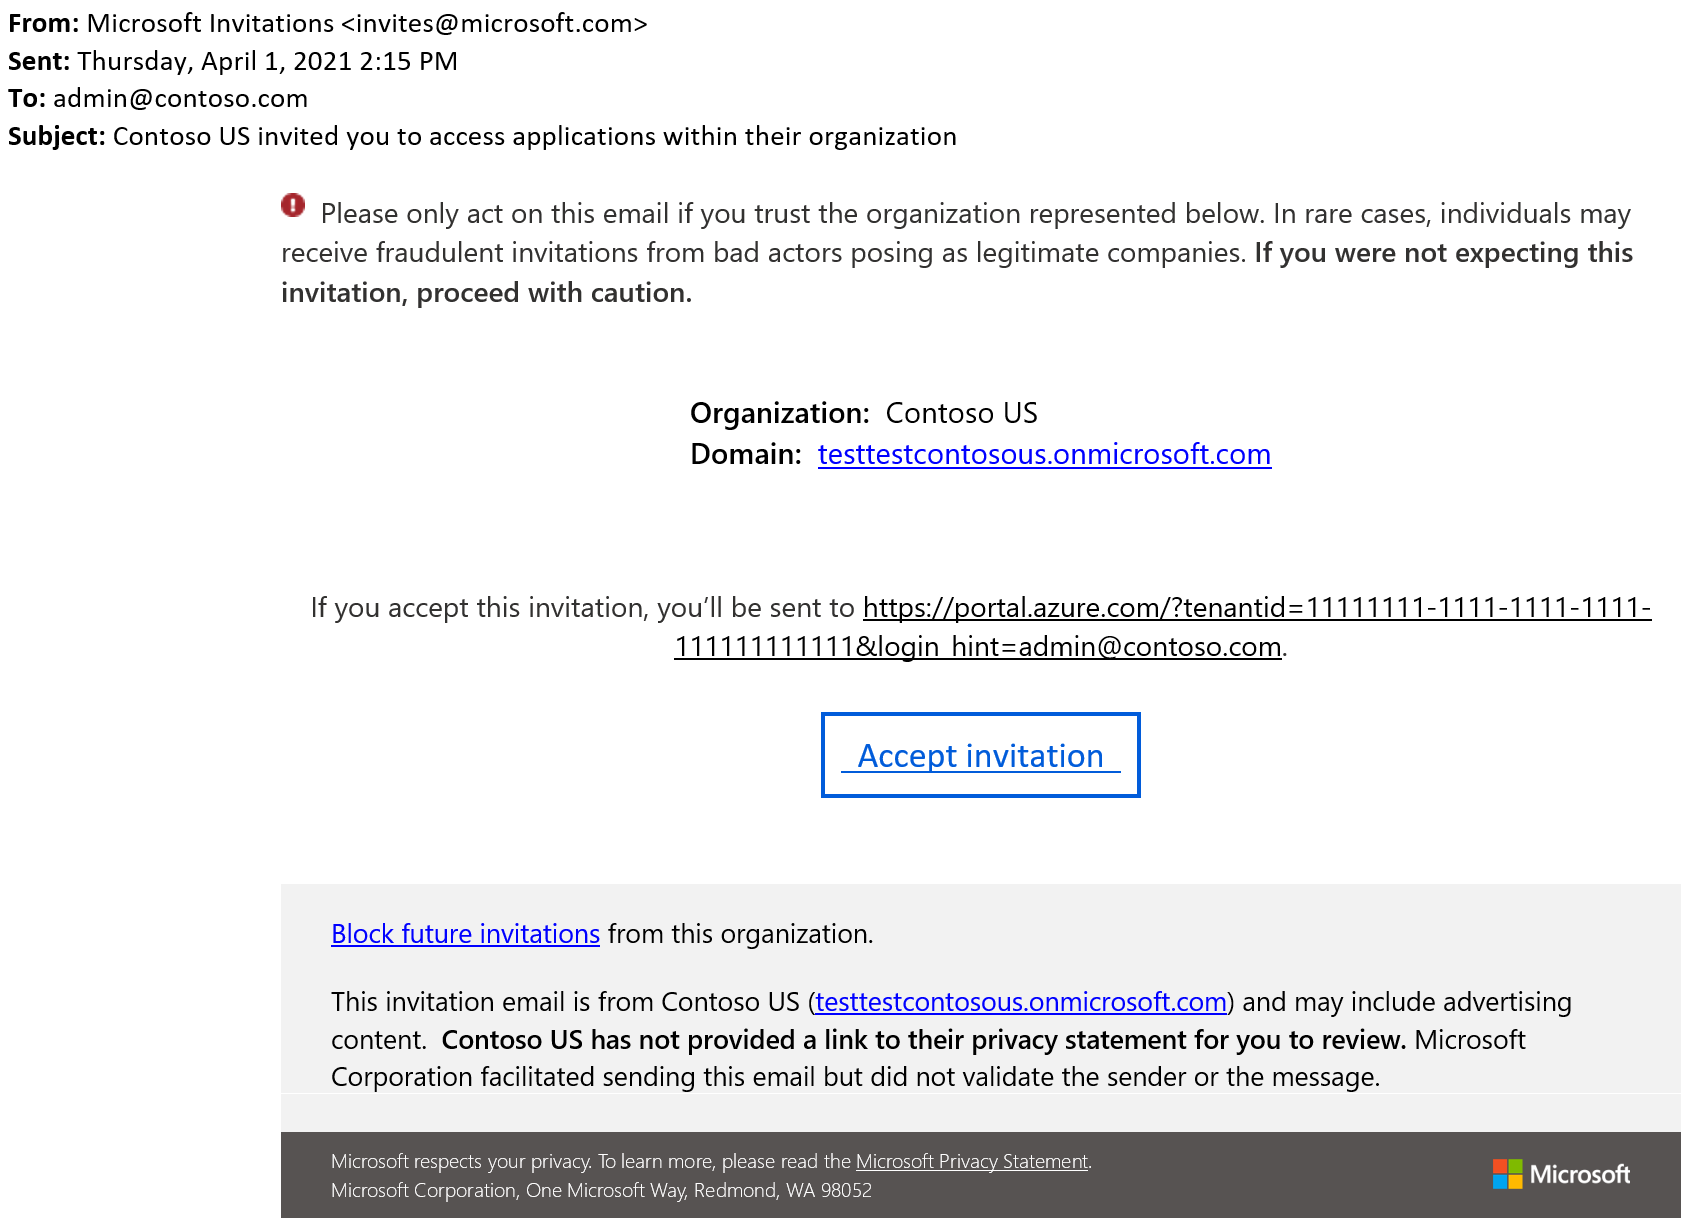 Screenshot showing an example email invitation.